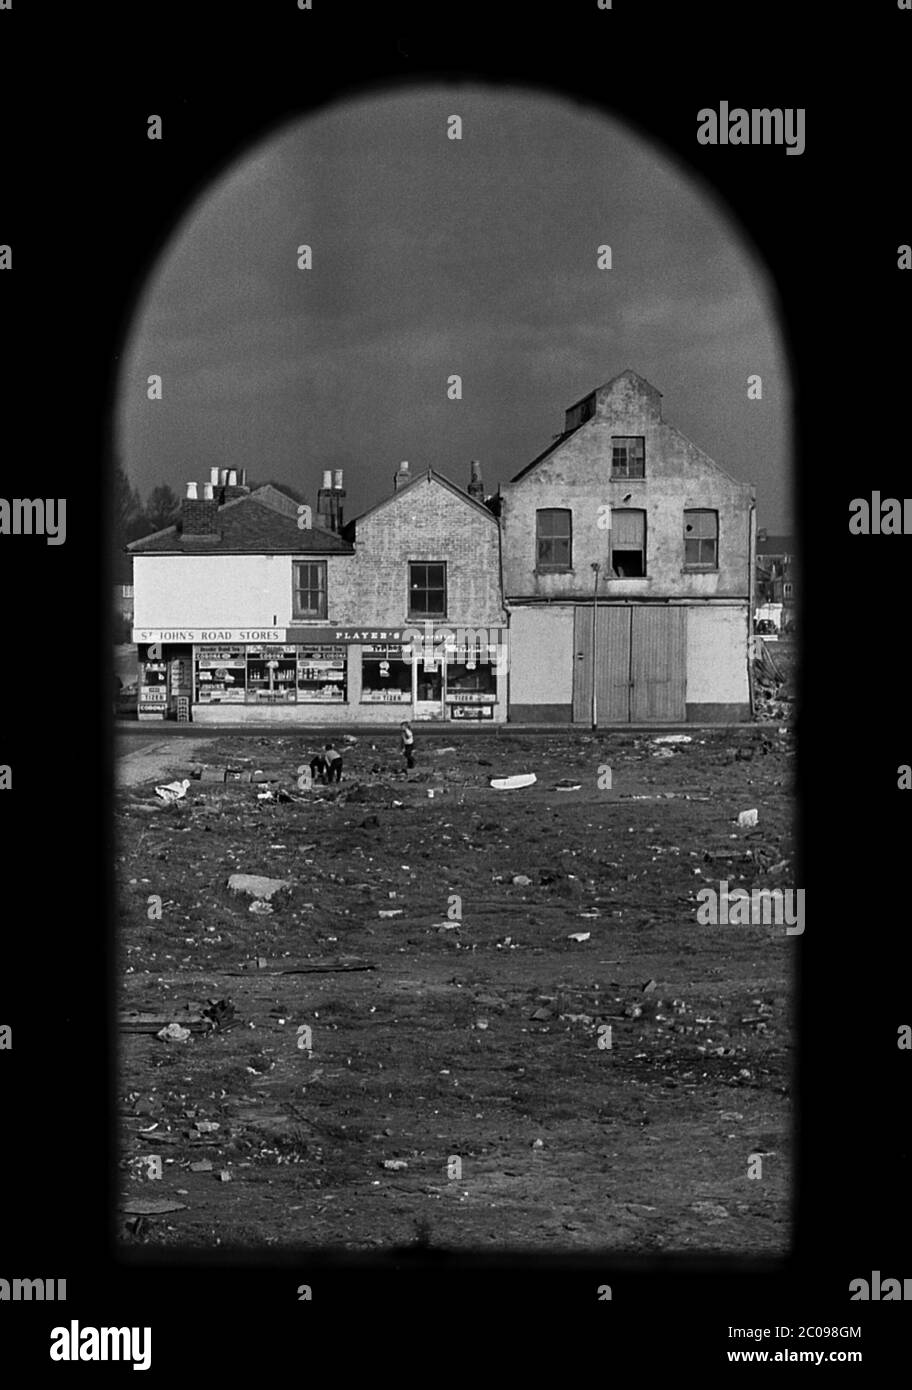 AJAXNETPHOTO. MARCH, 1968. PORTSMOUTH, ENGLAND. - FRAMED - VIEW THROUGH DOORWAY OF PART DEMOLISHED HOUSE OF ST.JOHN'S ROAD STORES, LAKE ROAD AREA. CHILDREN PLAYING ON WASTELAND.PHOTO:JONATHAN EASTLAND/AJAX REF:3568137 10 131 Stock Photo